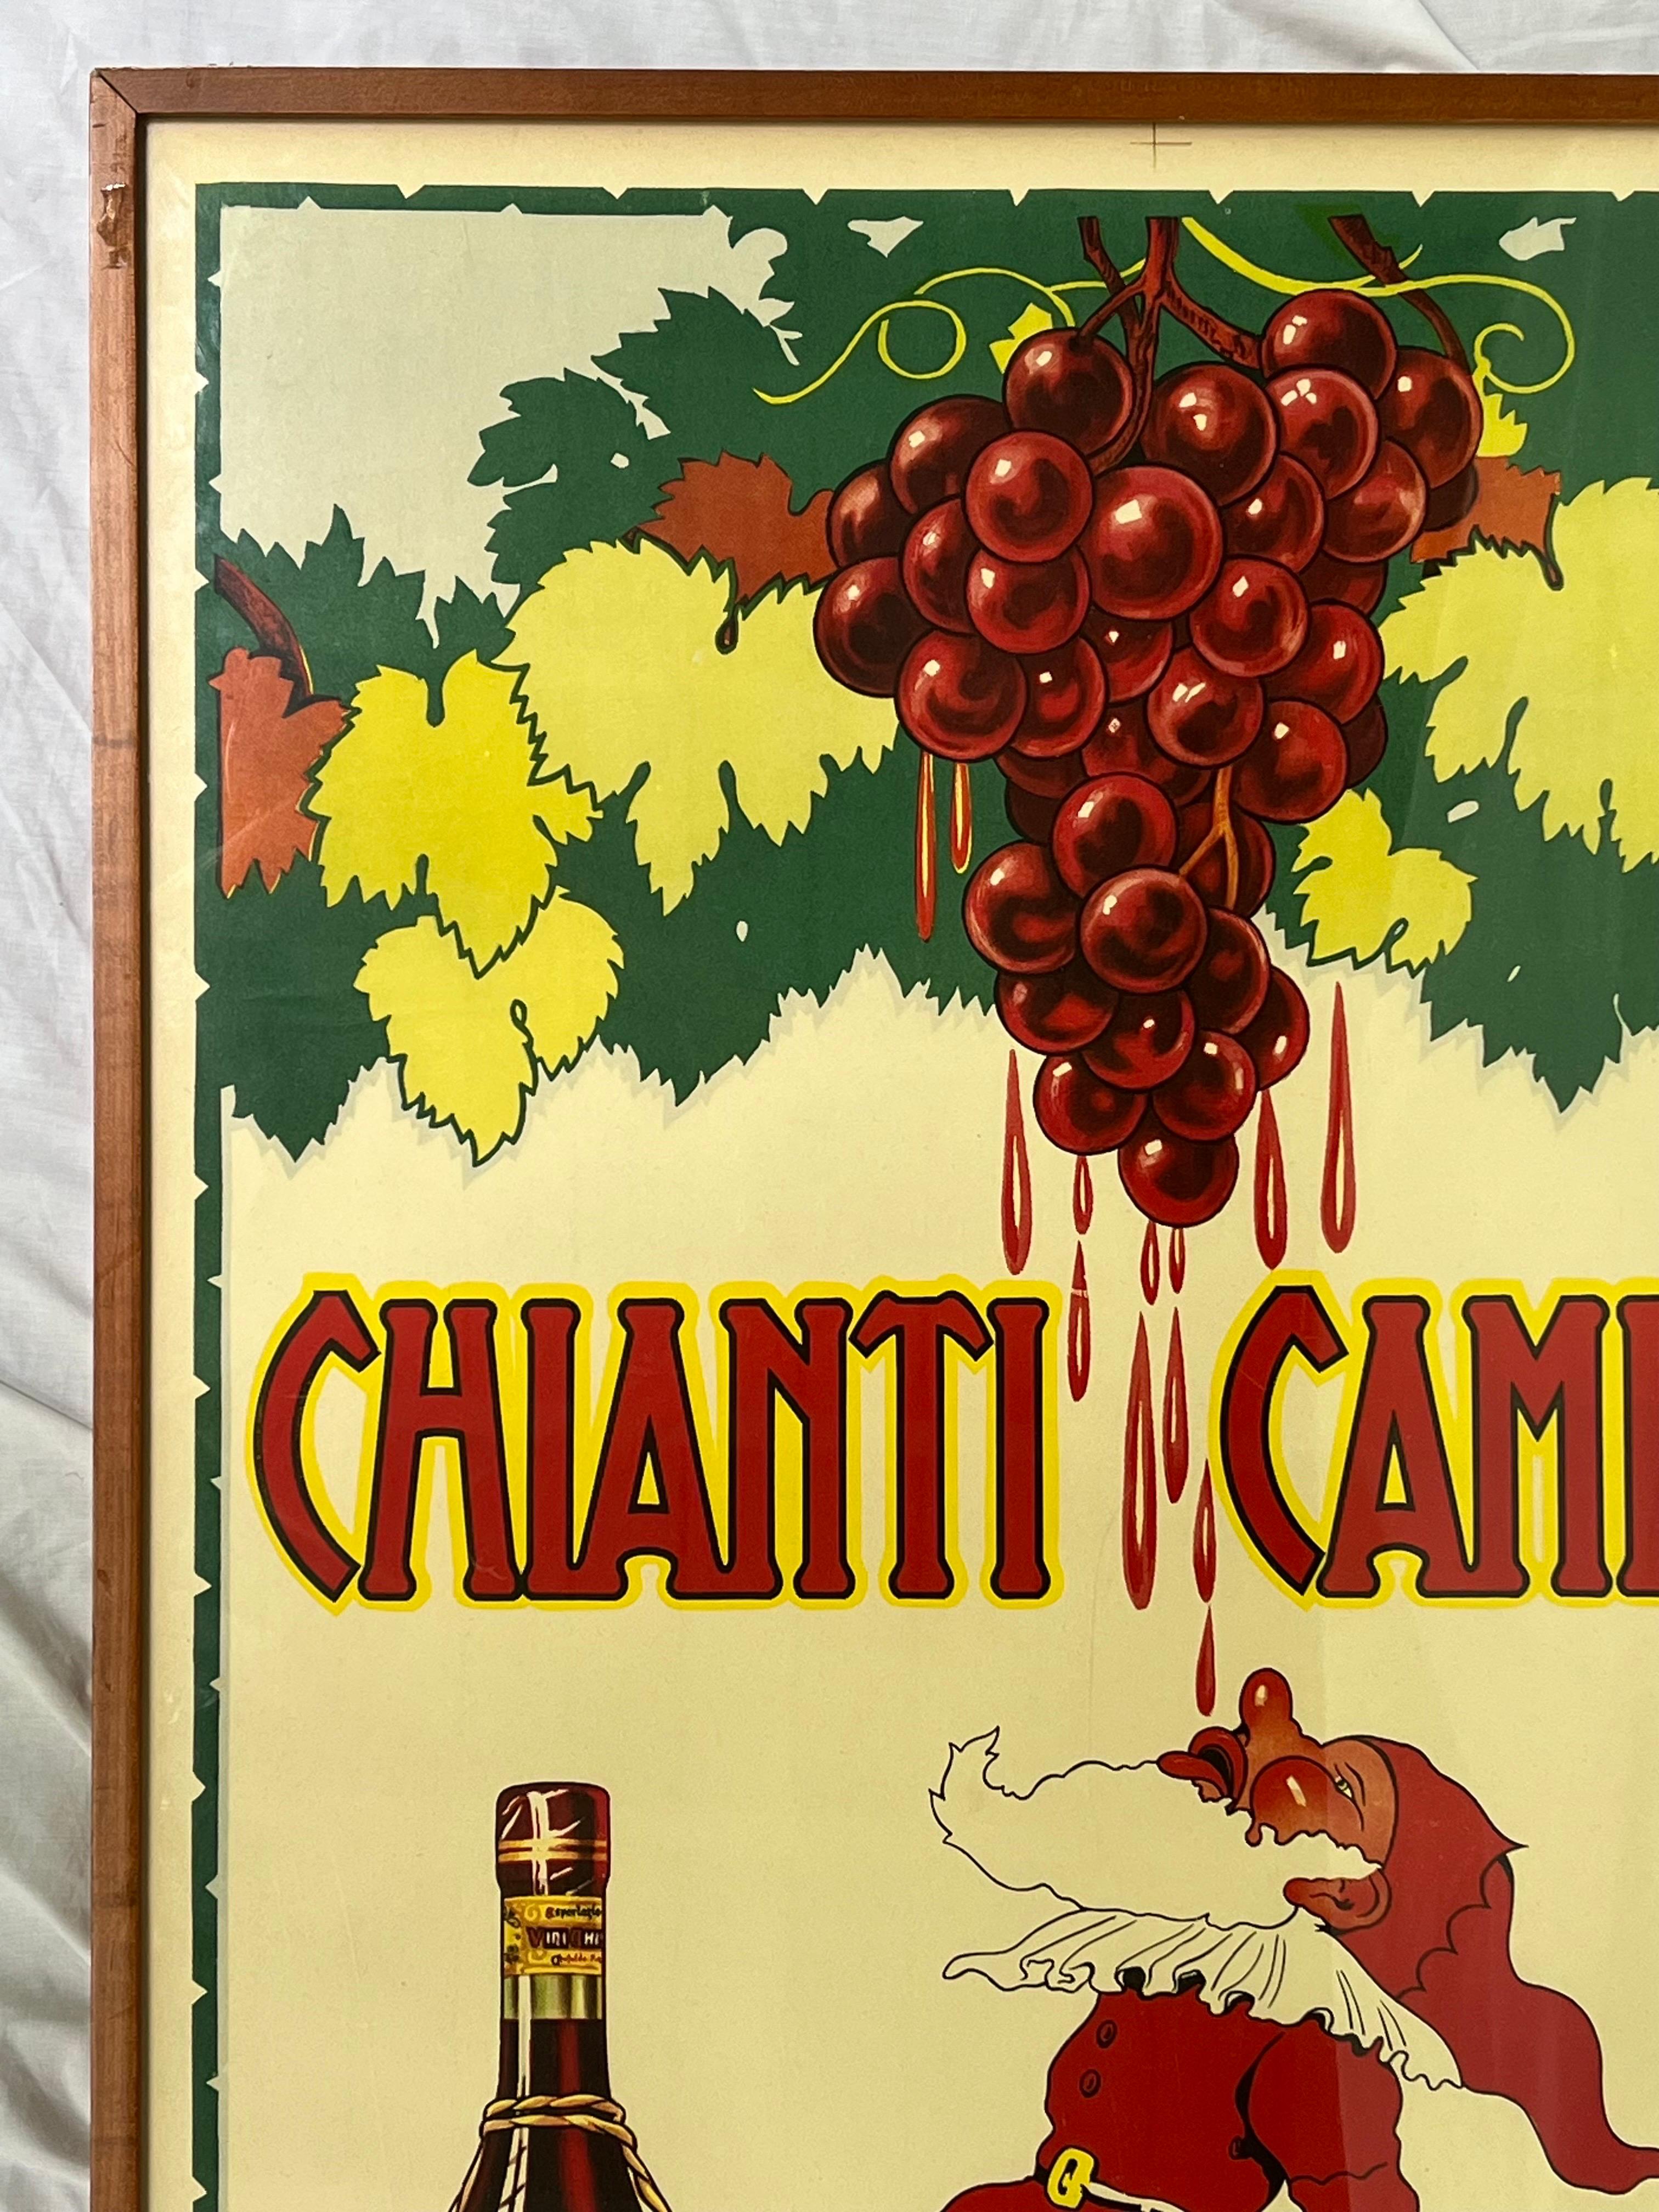 Chianti Campani Vintage Midcentury Italian Poster Featuring a Gnome and Wine 1